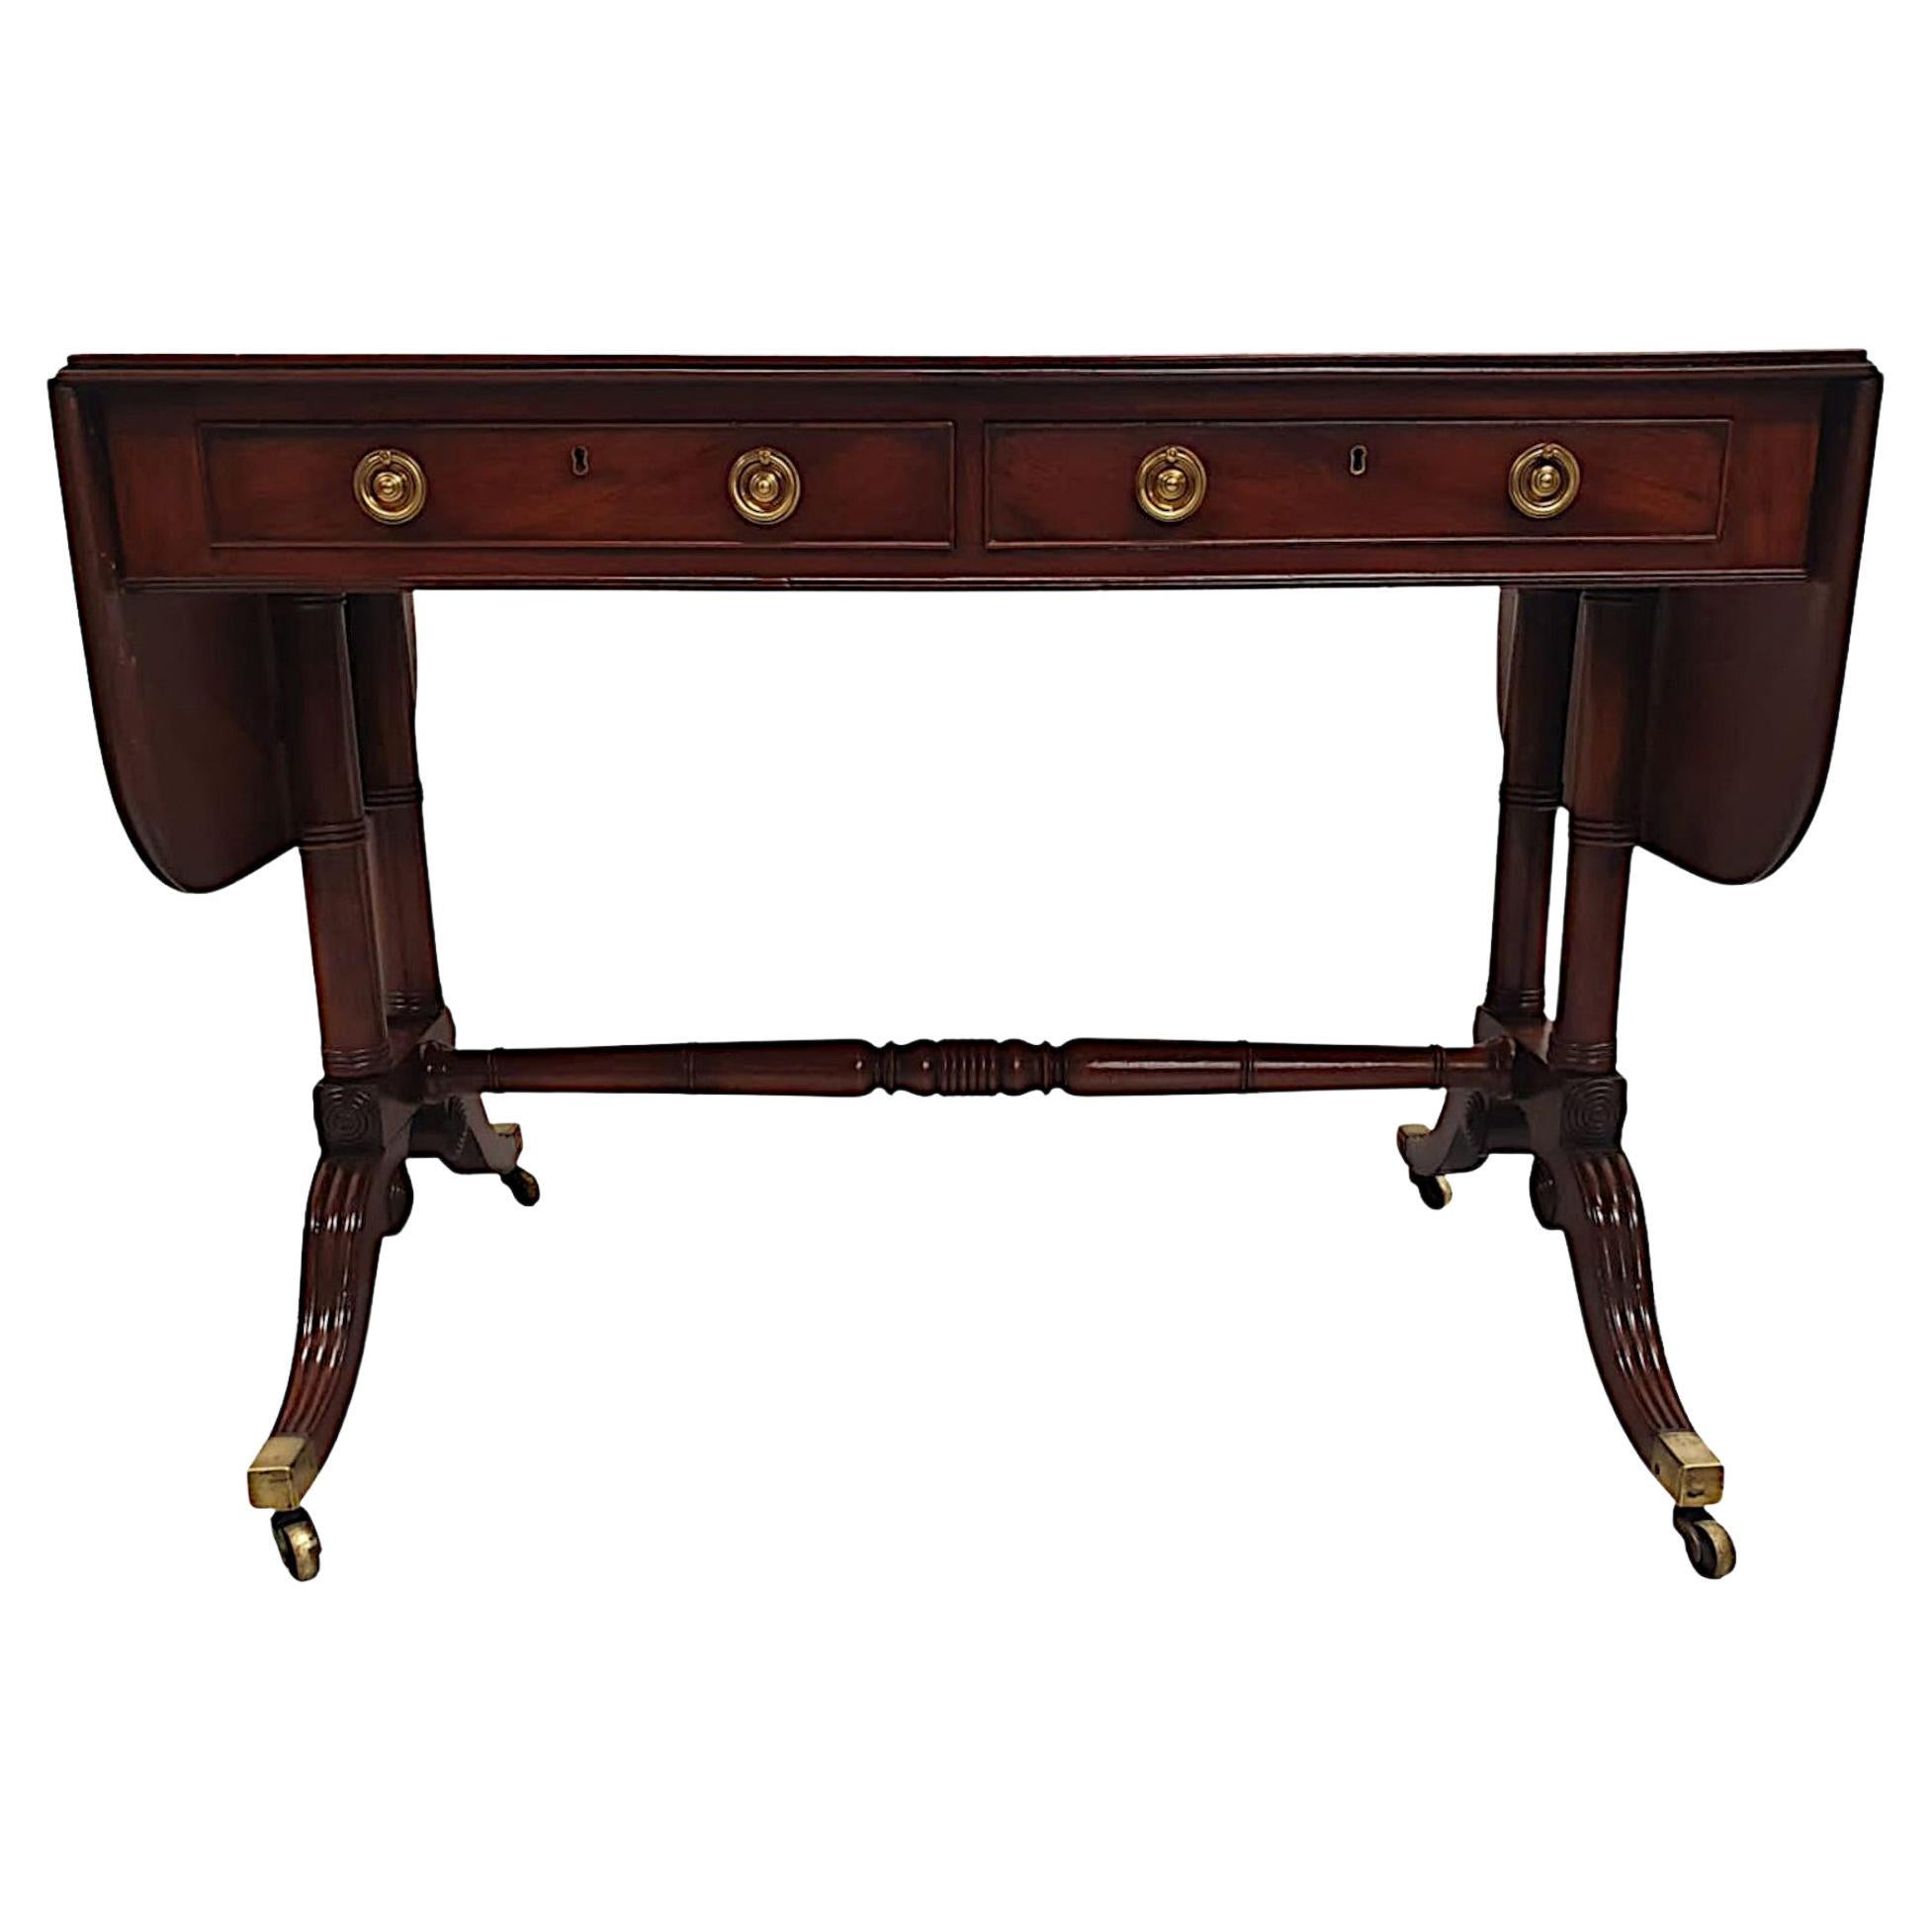 Very Fine Early 19th Century Regency Sofa Table For Sale